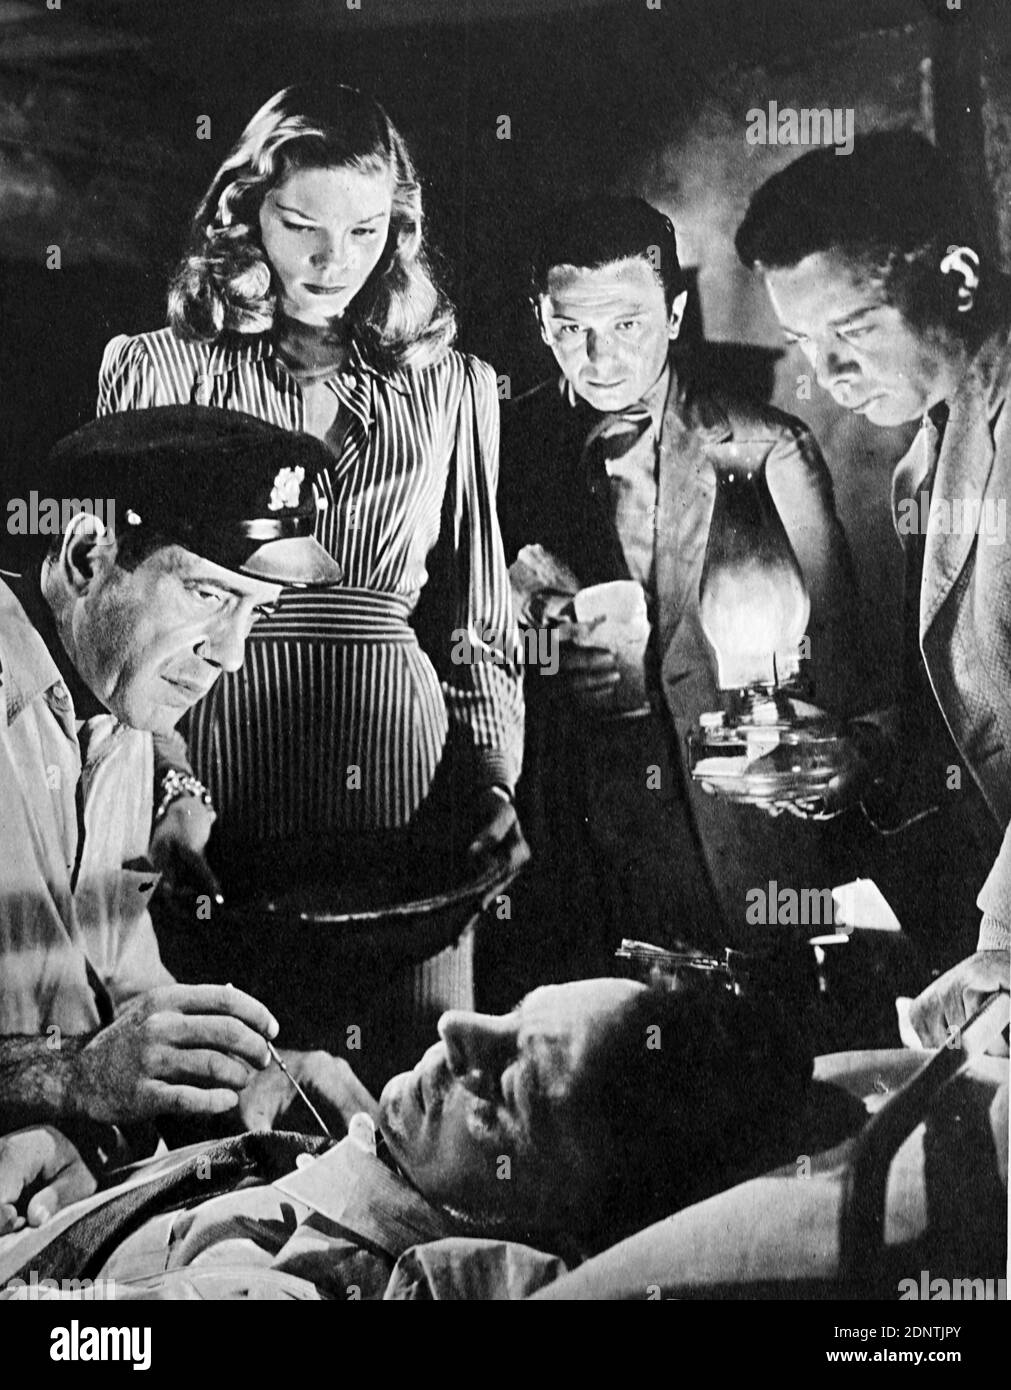 Film still from 'To Have and Have Not' starring Lauren Bacall, Humphrey Bogart, Dolores Moran, and Walter Brennan. Stock Photo